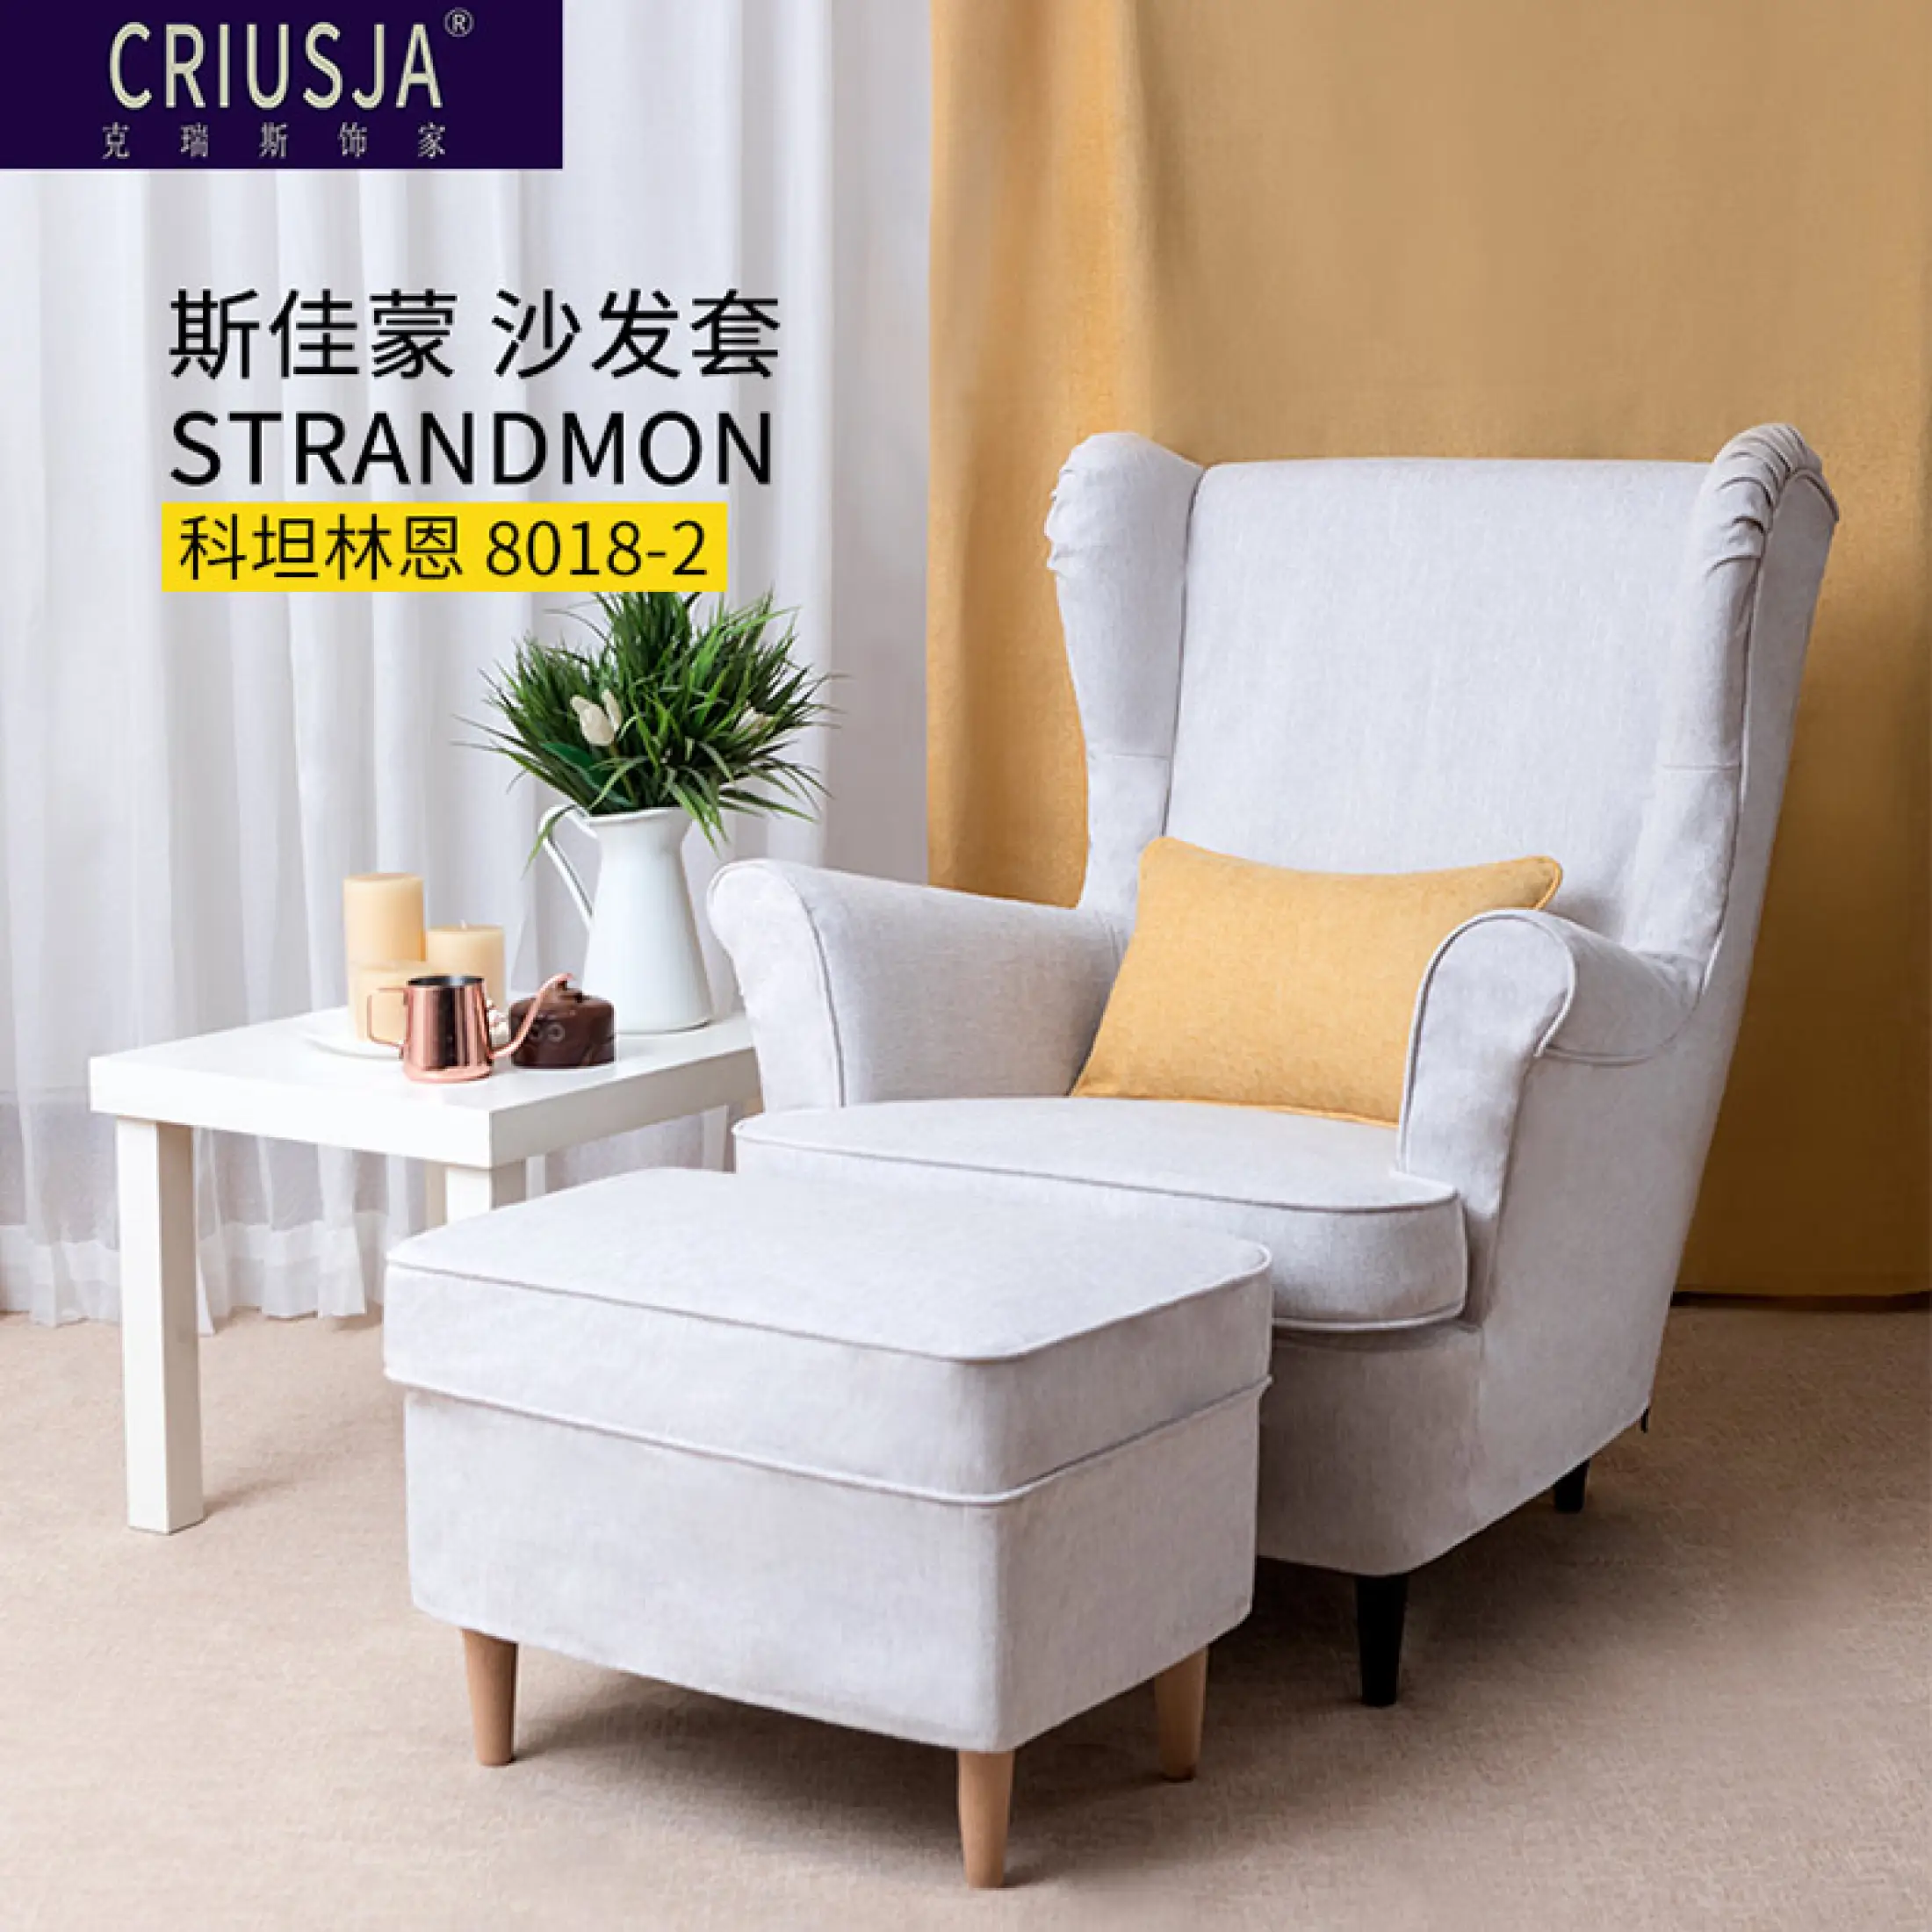 2030-49, Armchair Cover CRIUSJA Chair Cover for IKEA Strandmon Armchair Couch Cover for Living Room Armchair Sofa Slipcover